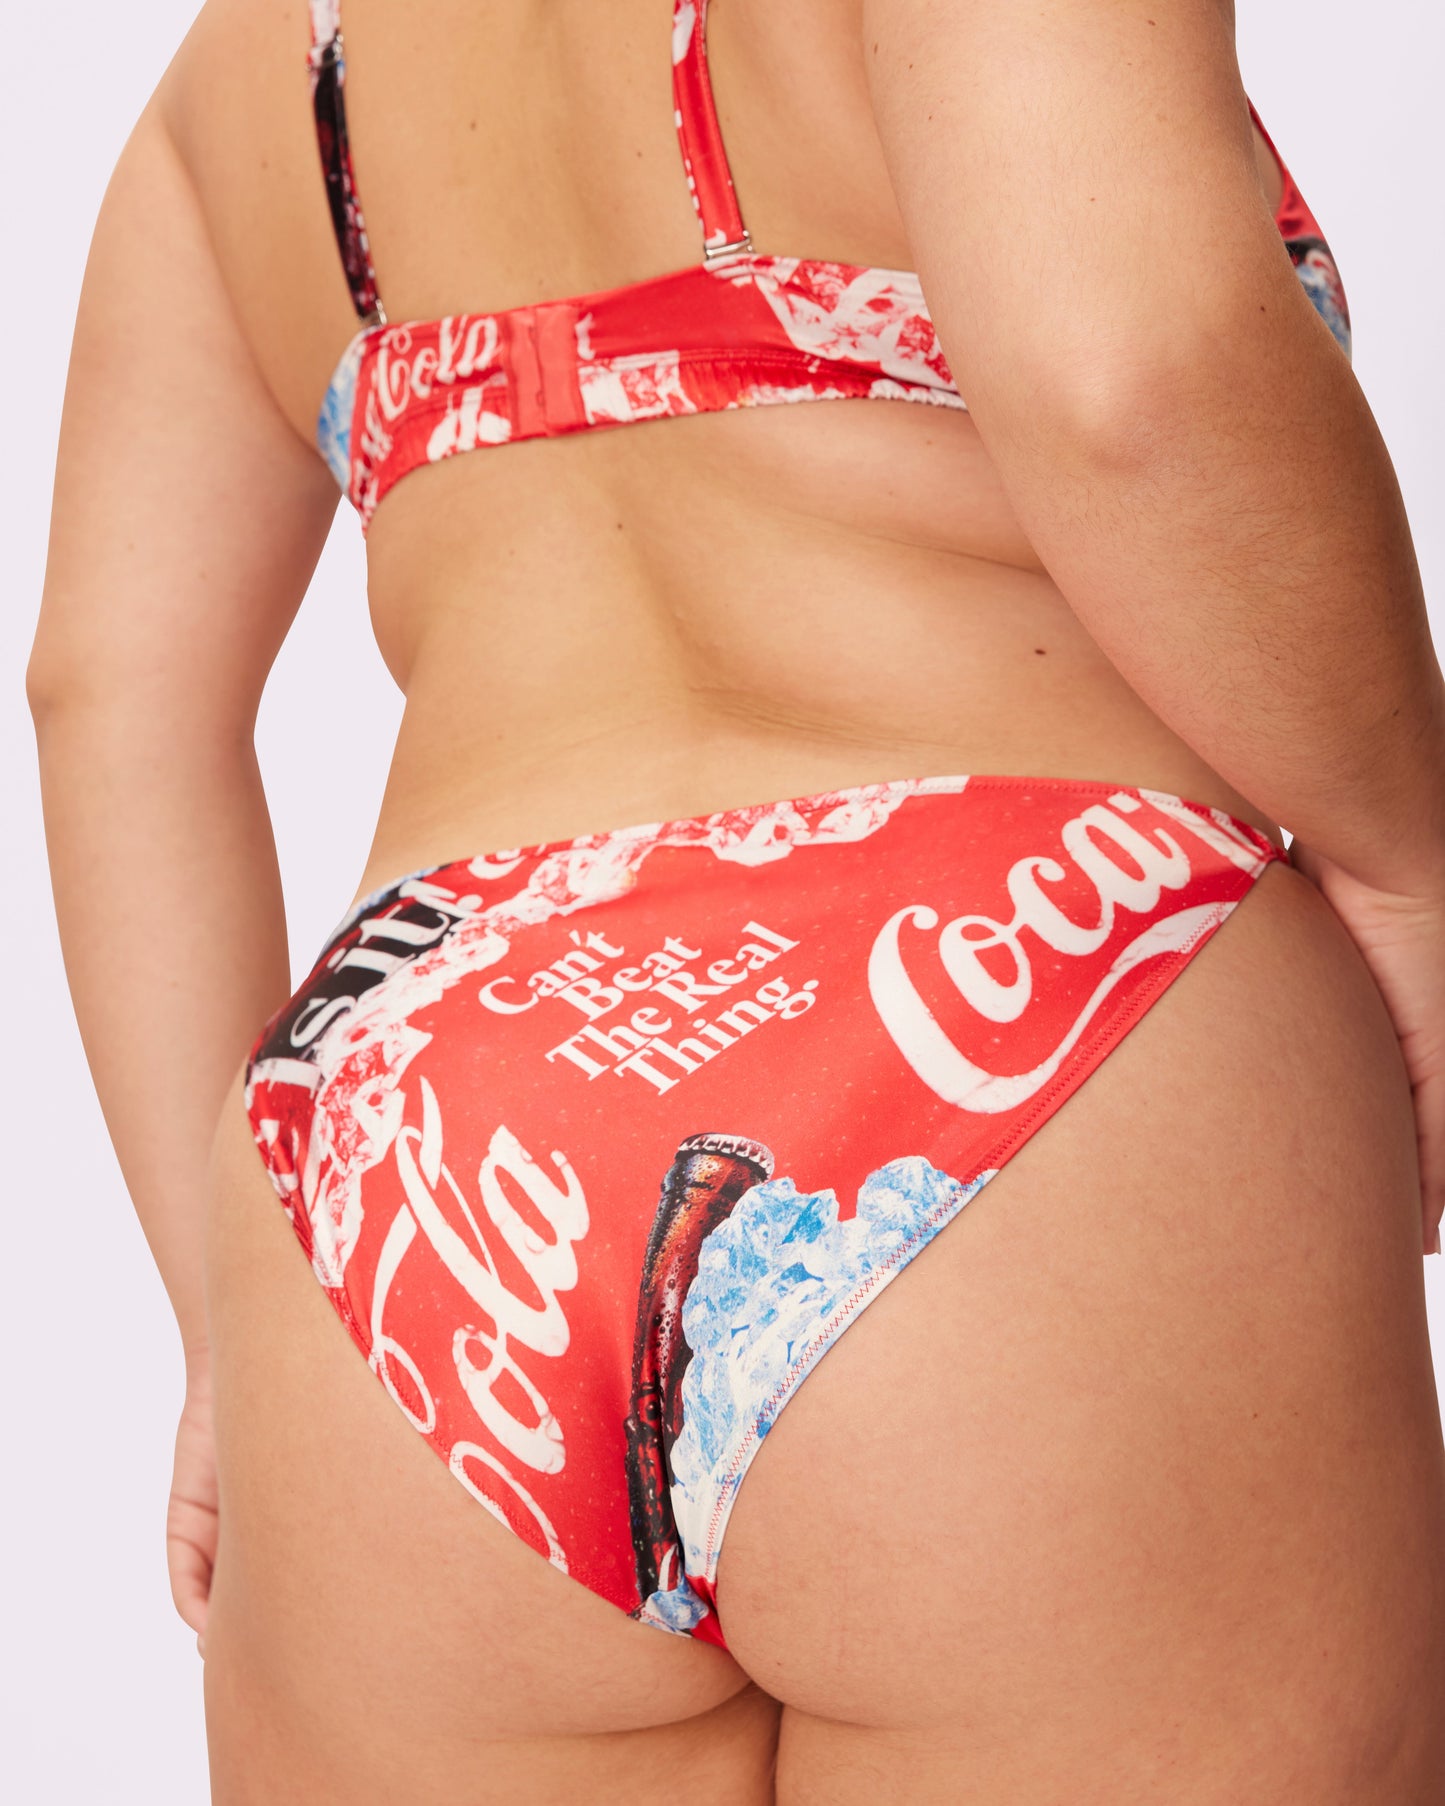 Special Edition Coca-Cola Satin Shine Cheeky | Glow Satin | Archive (Coke Is It)